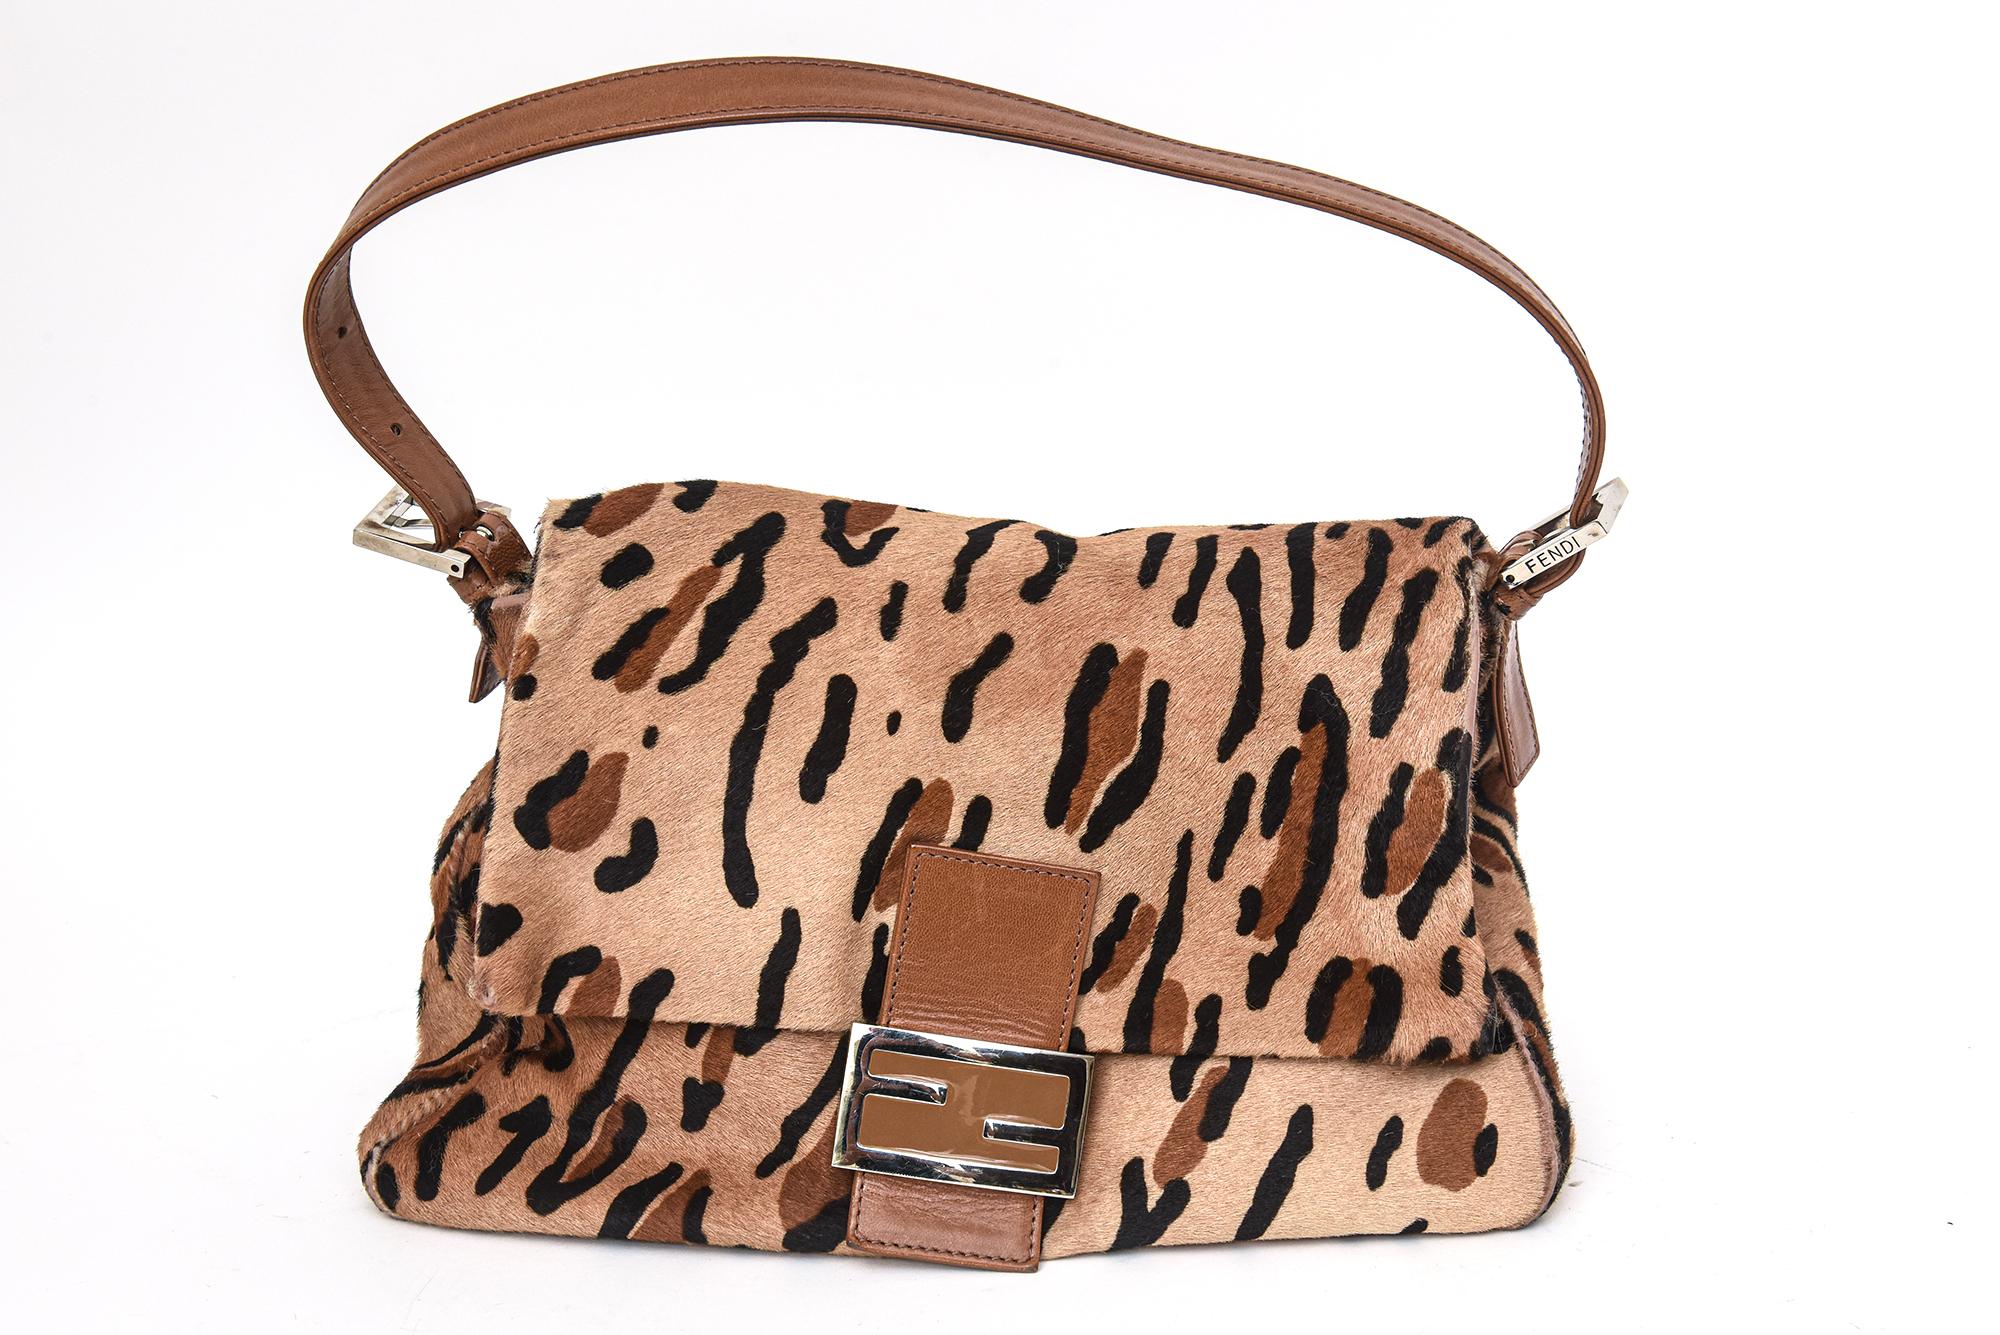 This chic and lovely Fendi leopard print pony hair mama baguette handbag has a tan leather handle with a closure flap. The metal hardware is silver. It was from the 1990's. It comes with the original duster with draw strings in gold metal and the